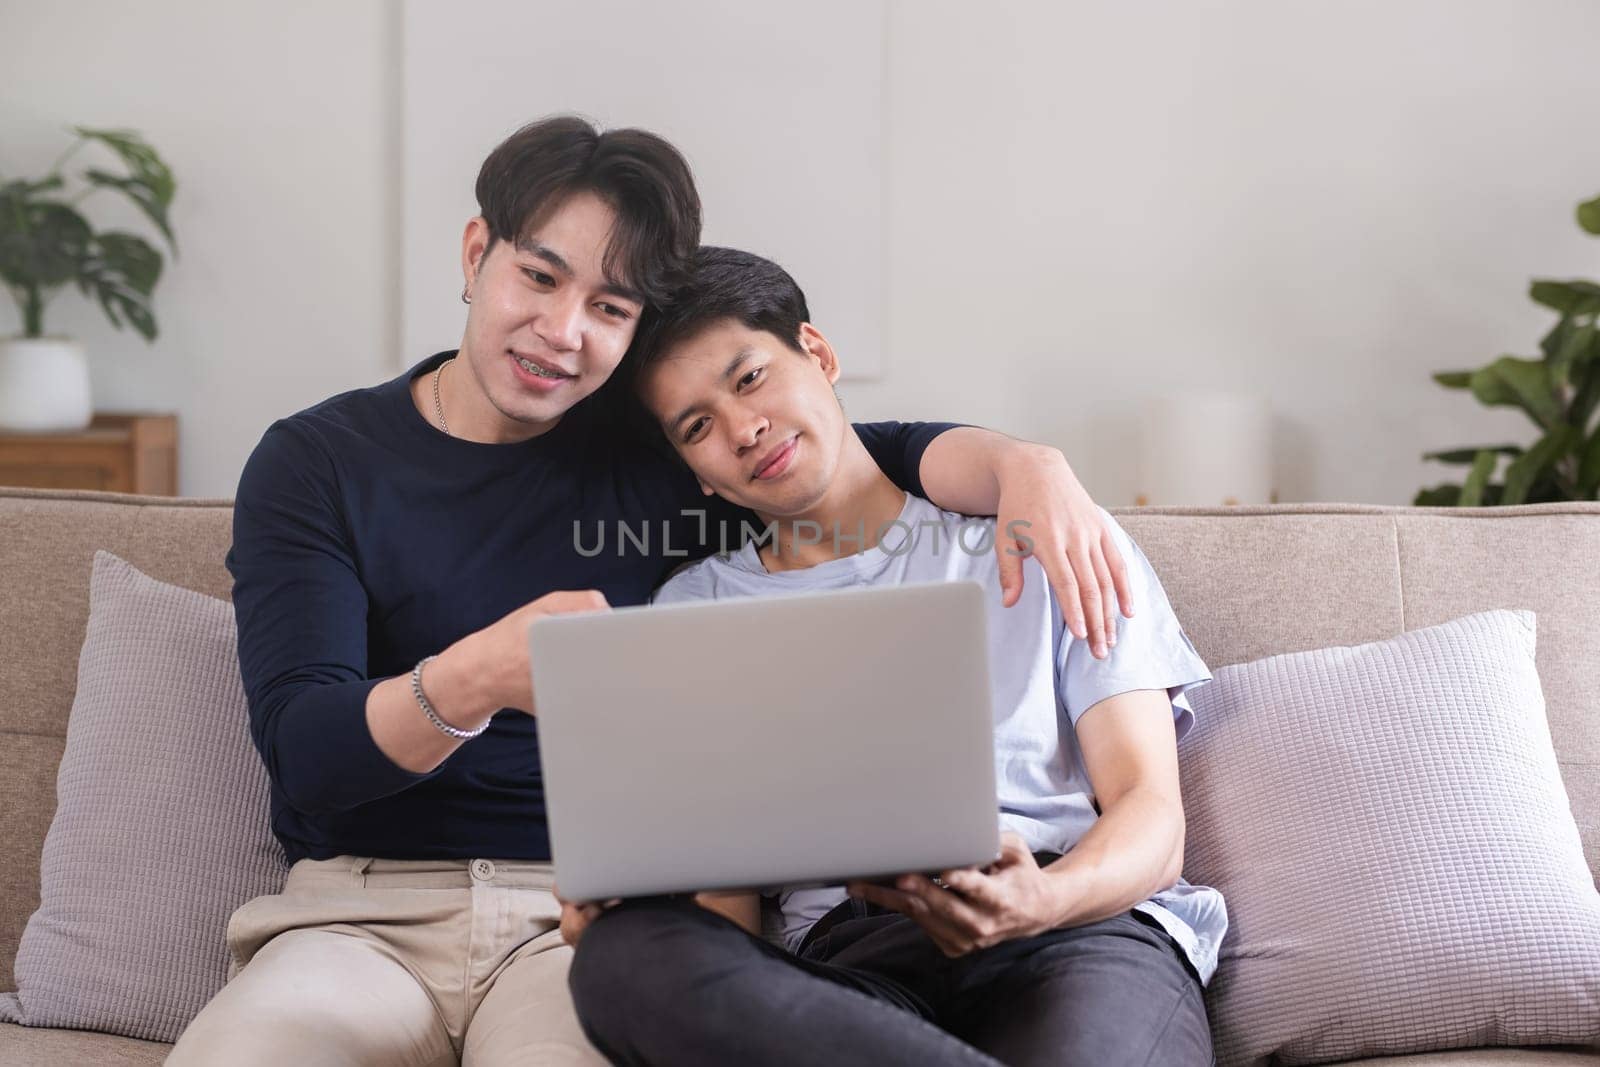 A gay couple spends their free time sitting on a laptop doing activities together on a holiday in the living room. by wichayada